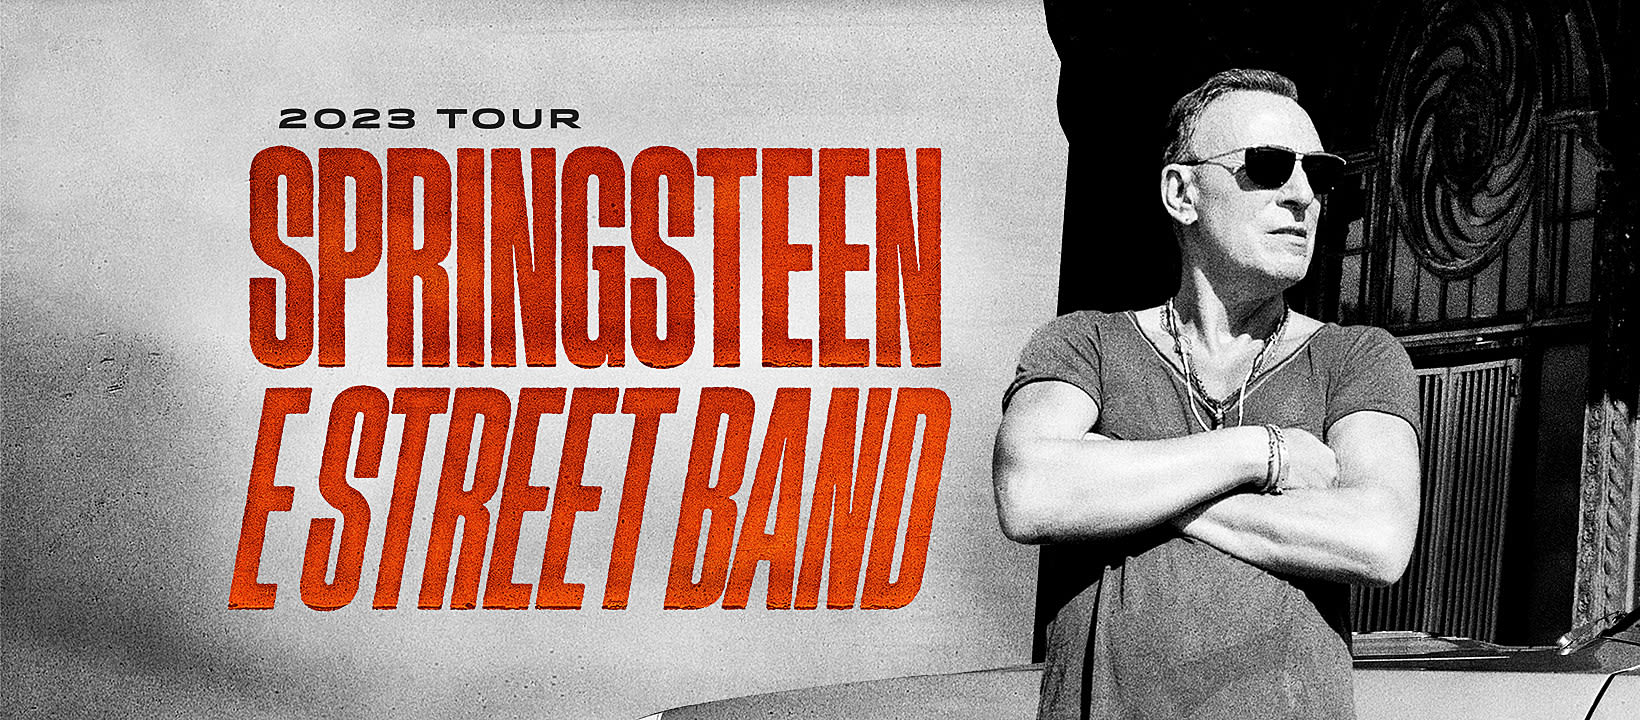 Bruce Springsteen Tour 2023 UK Dates & How to Get Tickets